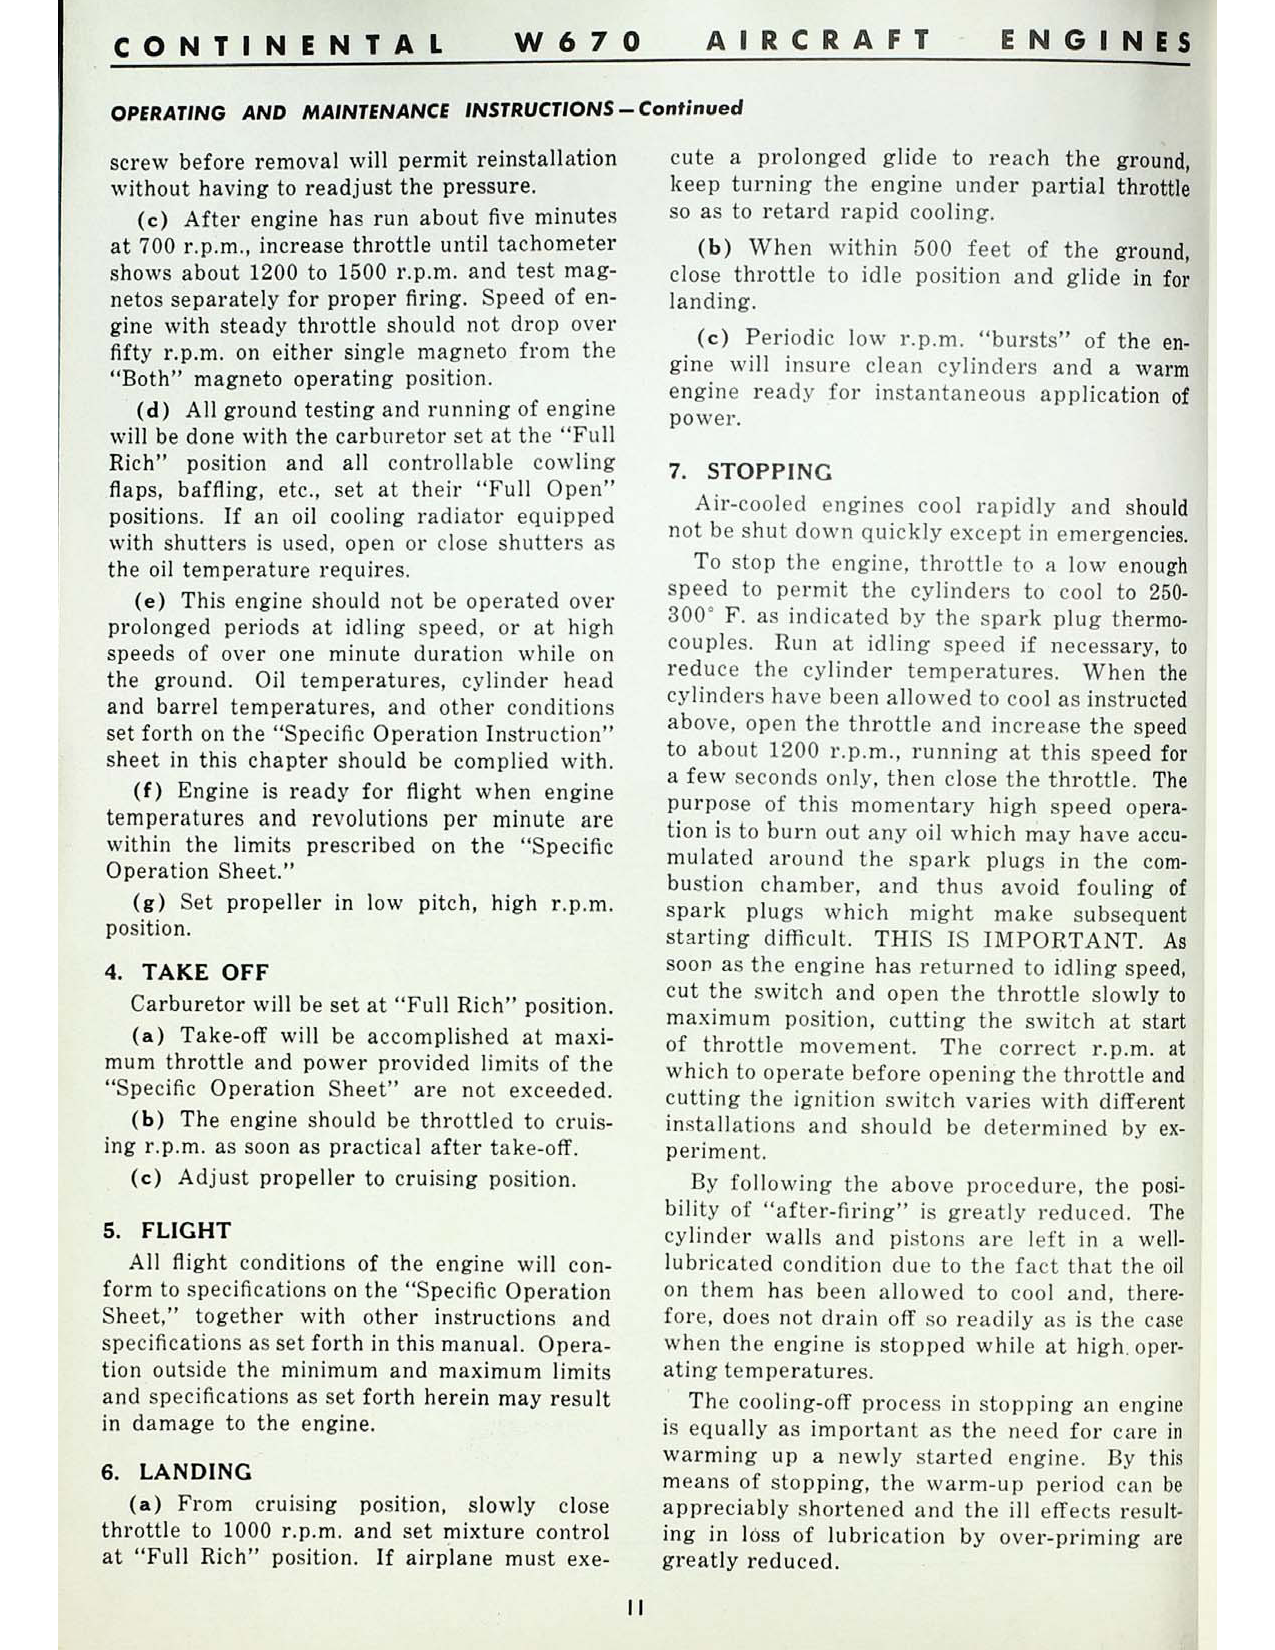 Sample page  3 from AirCorps Library document: Continental W-670 Engine - Operating & Maintenance Instructions